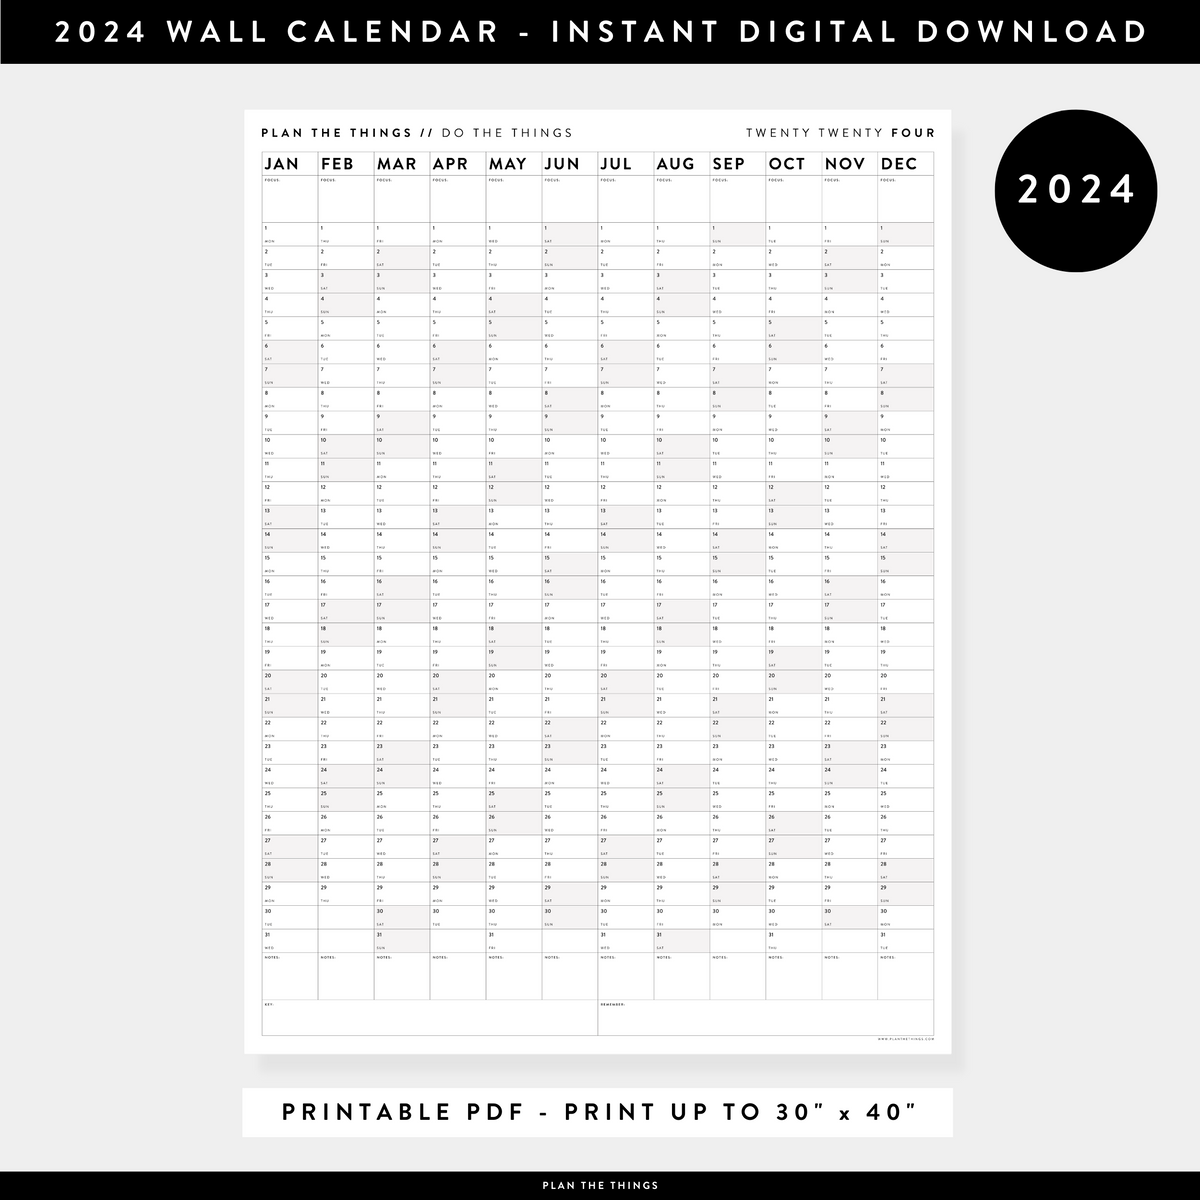 printable-vertical-2024-wall-calendar-with-gray-weekends-instant-dow-plan-the-things